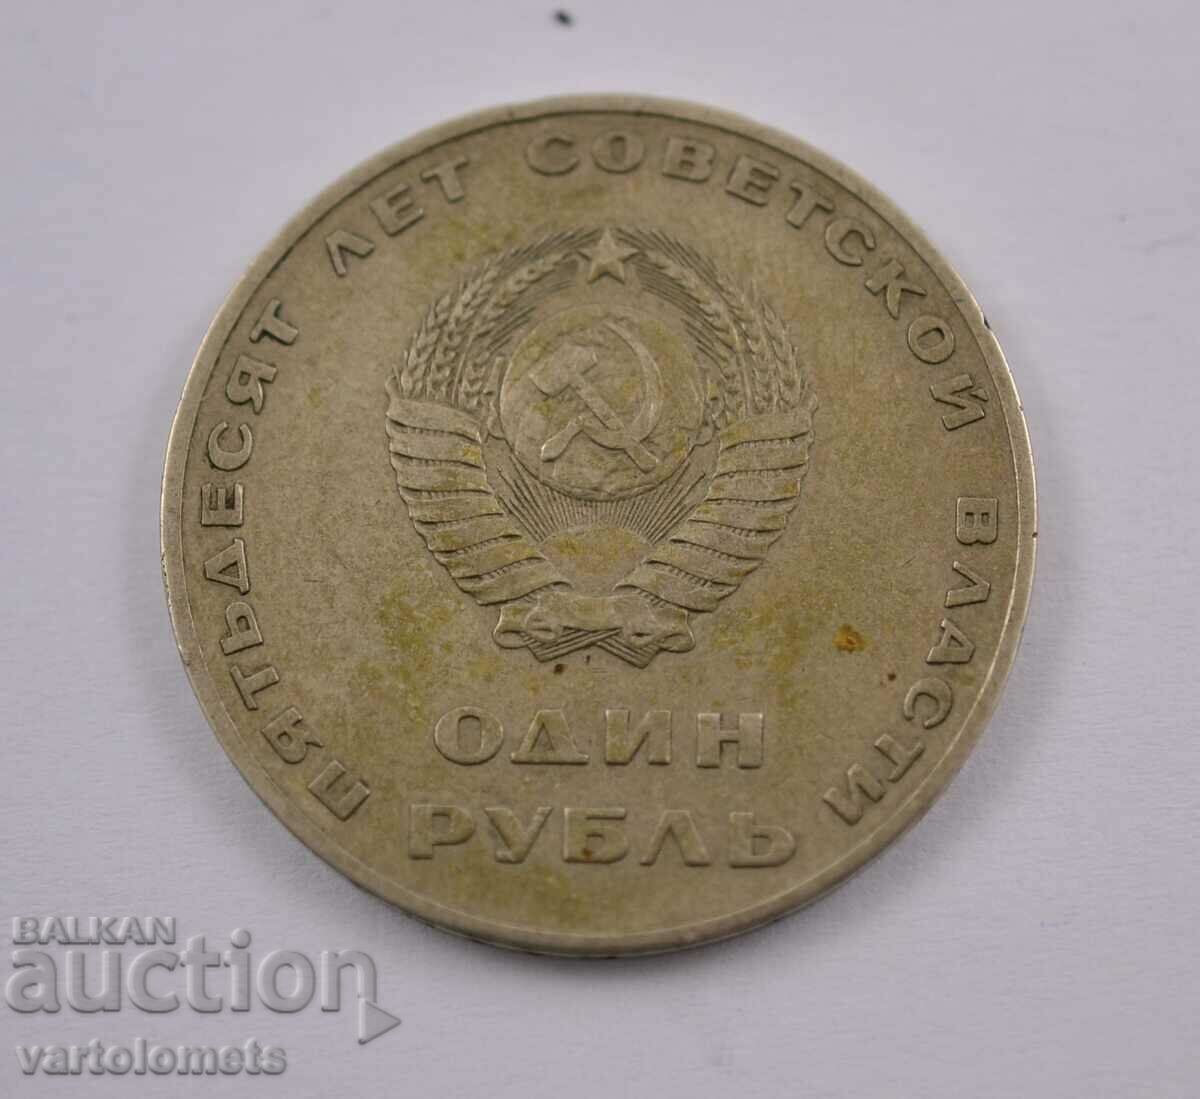 1 ruble 1967 - "50 years of Soviet power" USSR